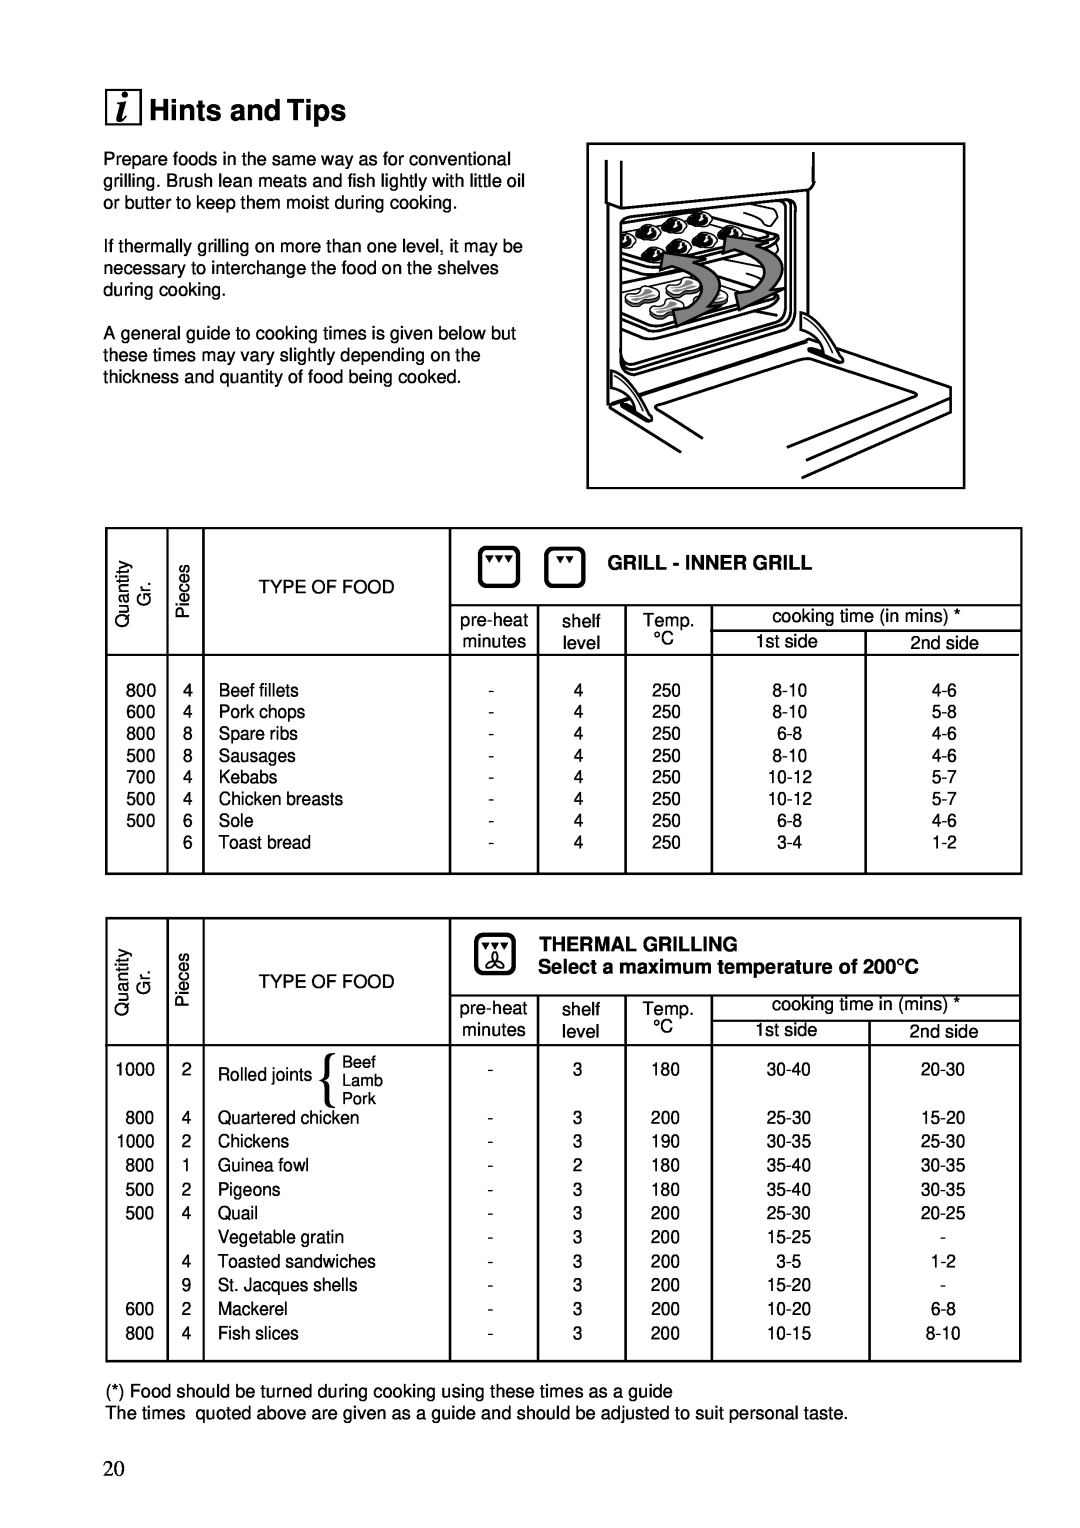 Zanussi ZBS 772 manual Hints and Tips, Grill - Inner Grill, THERMAL GRILLING Select a maximum temperature of 200C, Beef 